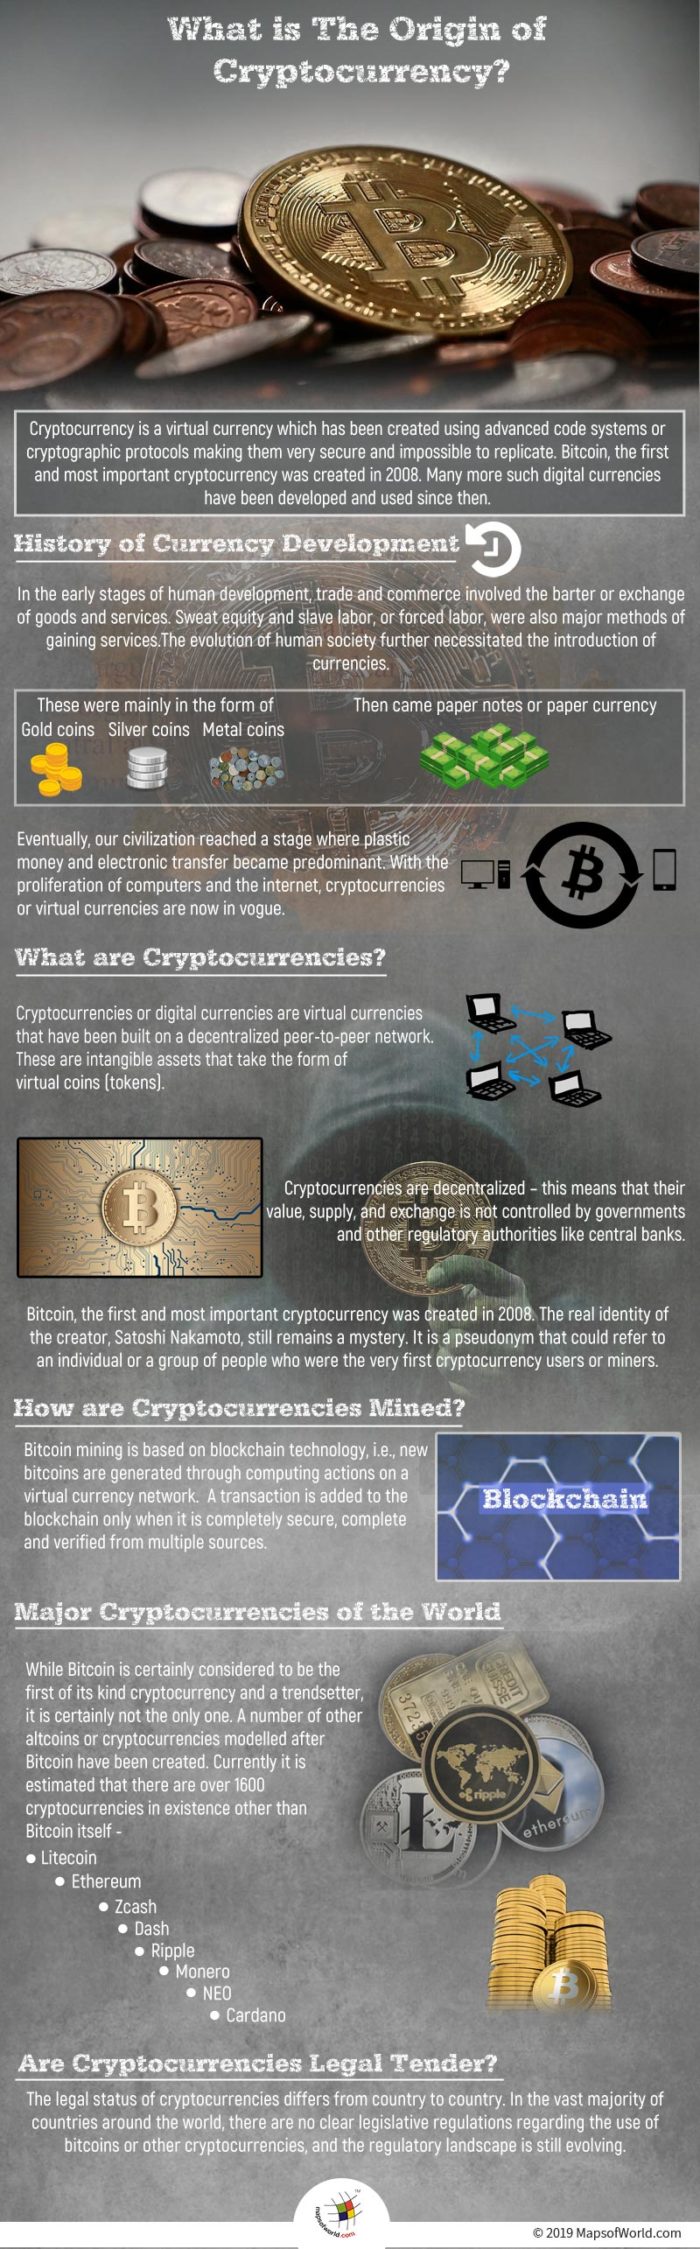 The Origin of Cryptocurrency